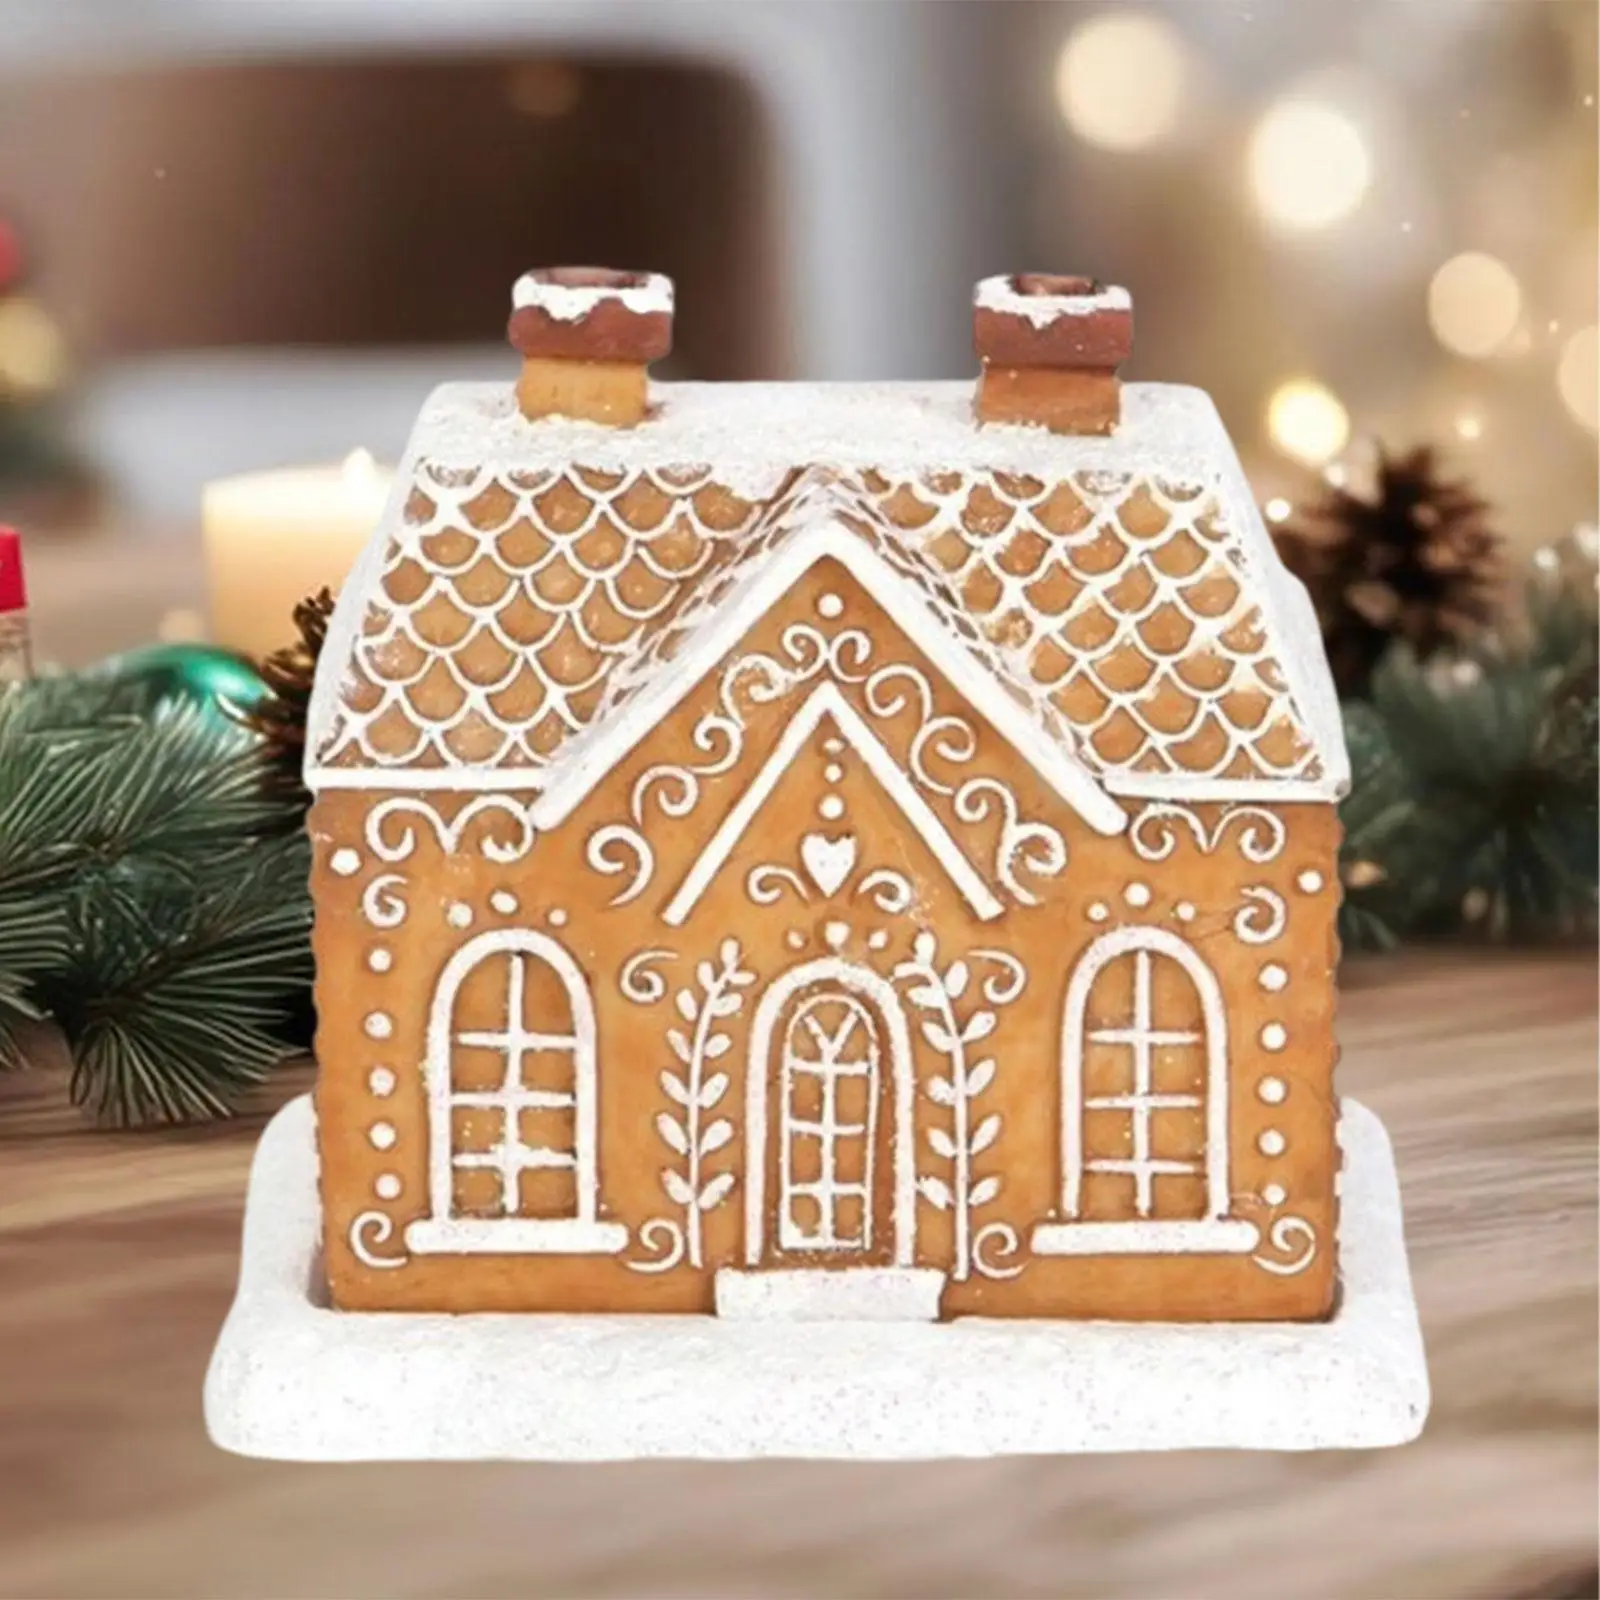 Christmas Incense Holder Backflow Chimney Creative Crafts Xmas Ornament Decoration for Collectible Home Table Holiday